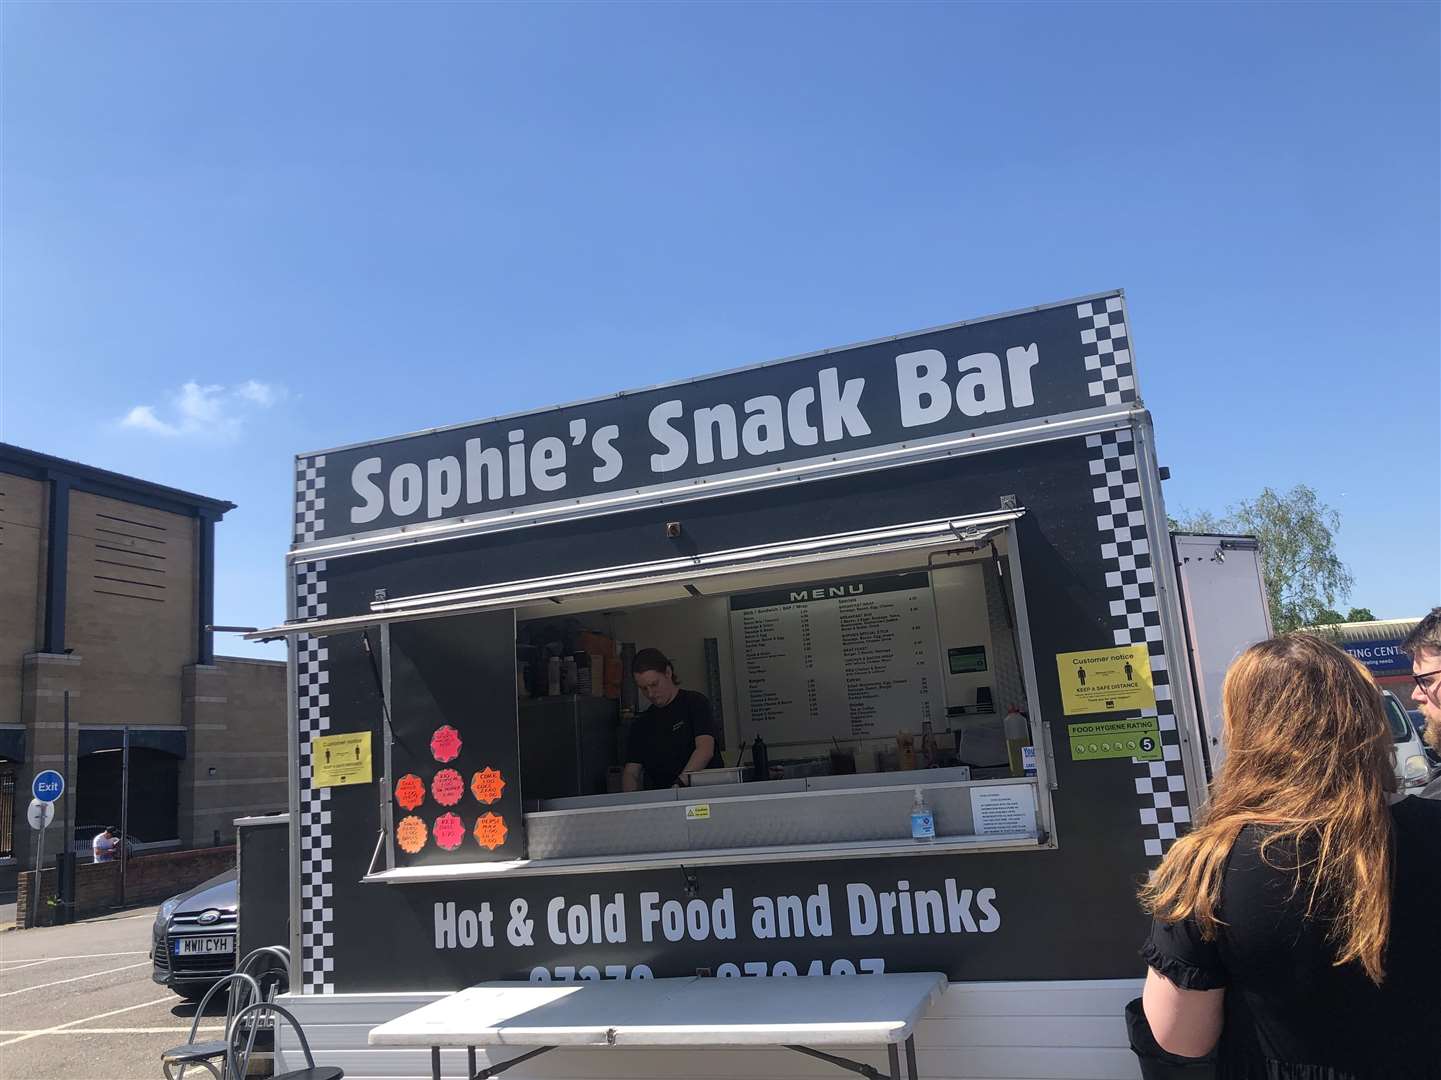 Sophie's Snack Bar outside B&Q in Maidstone and near Lockmeadow and McDonald's